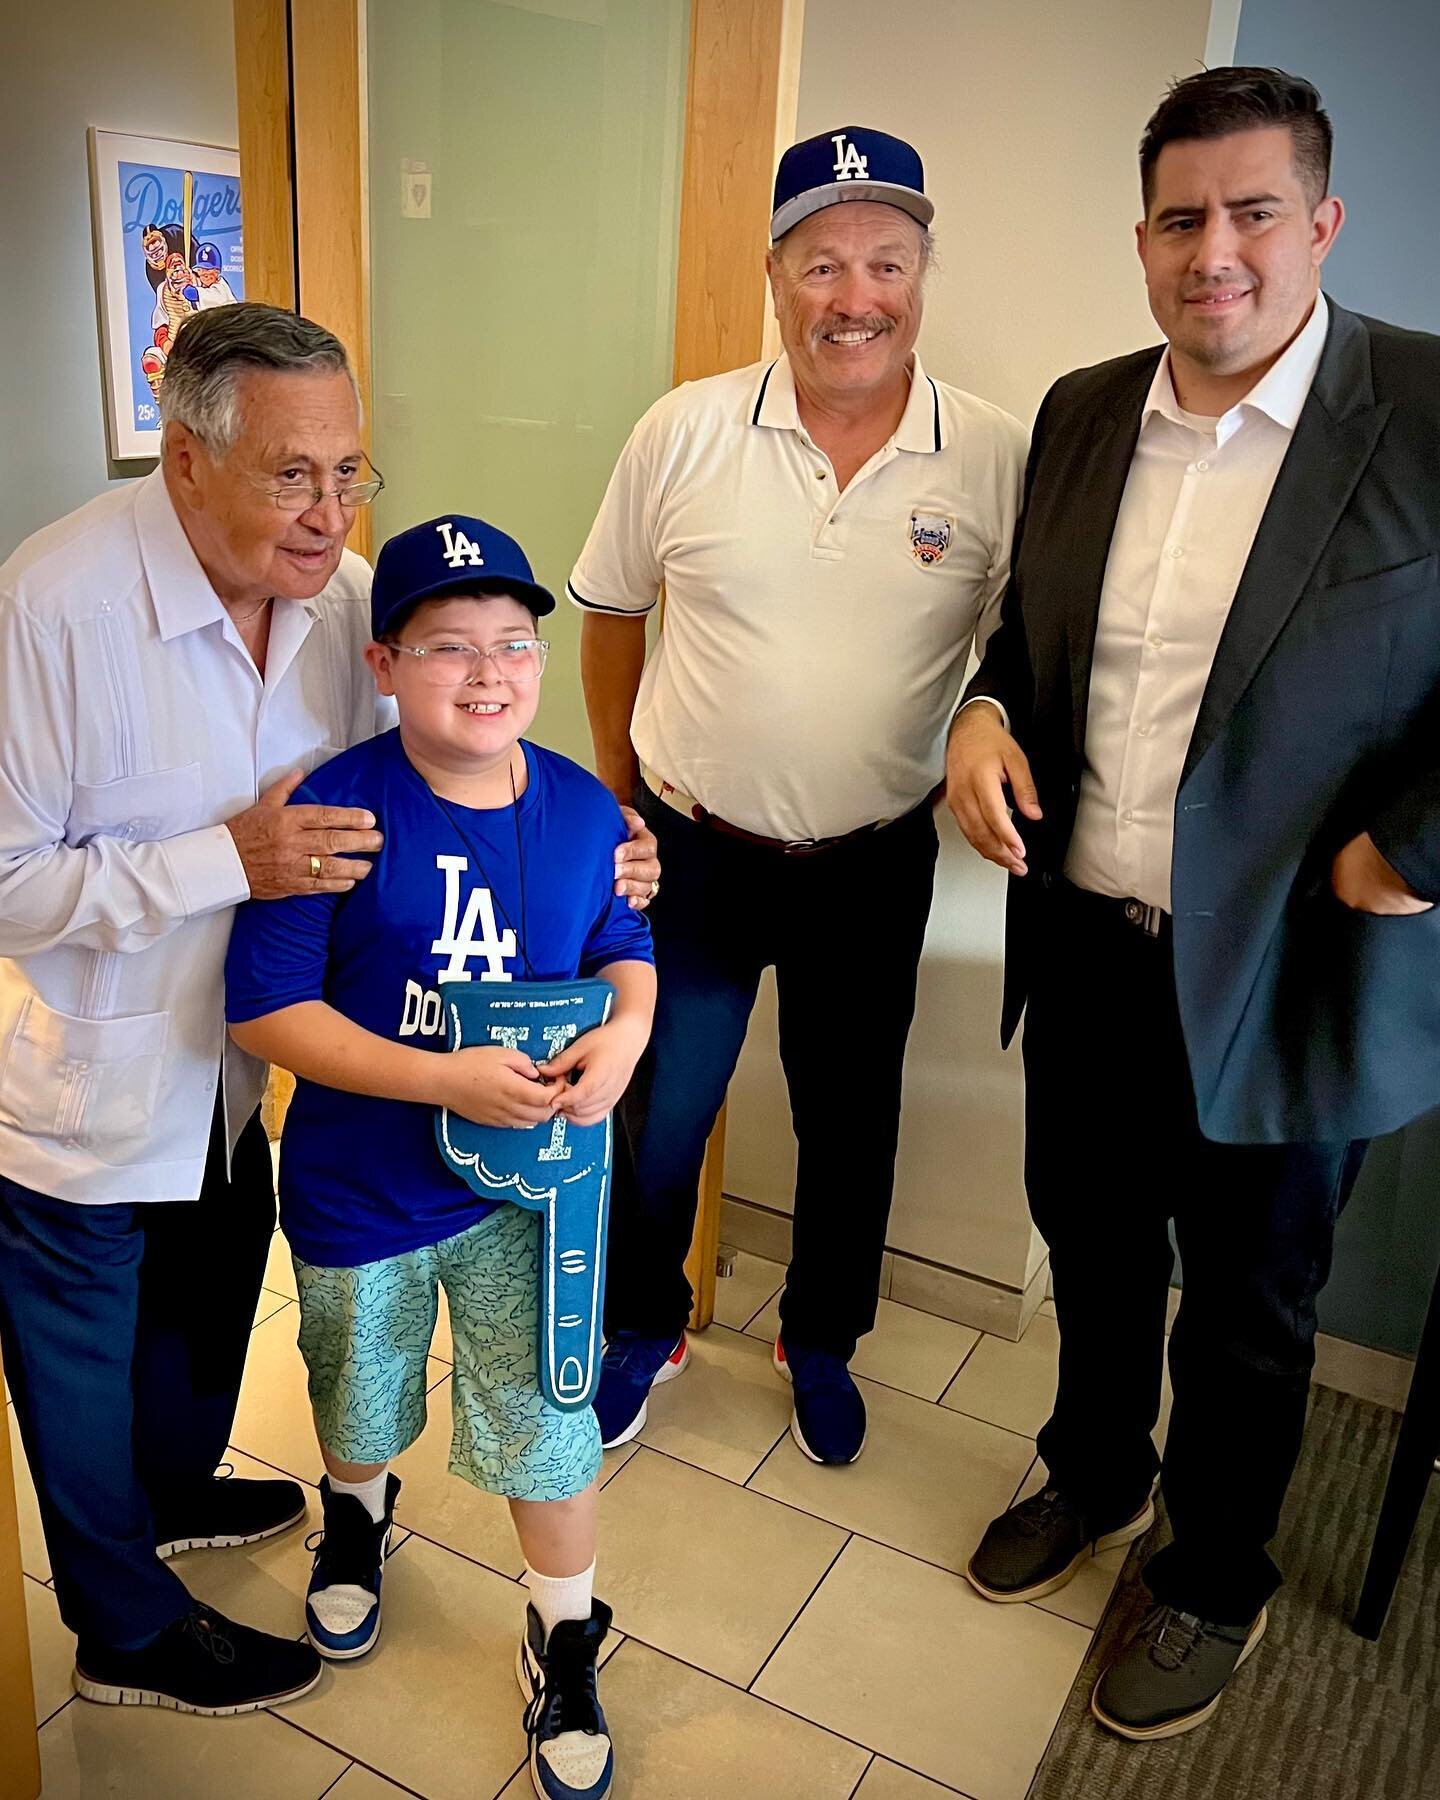 Here with Jaime celebrating his last year with the Dodgers on Sunday honoring the youth who playing little league baseball.